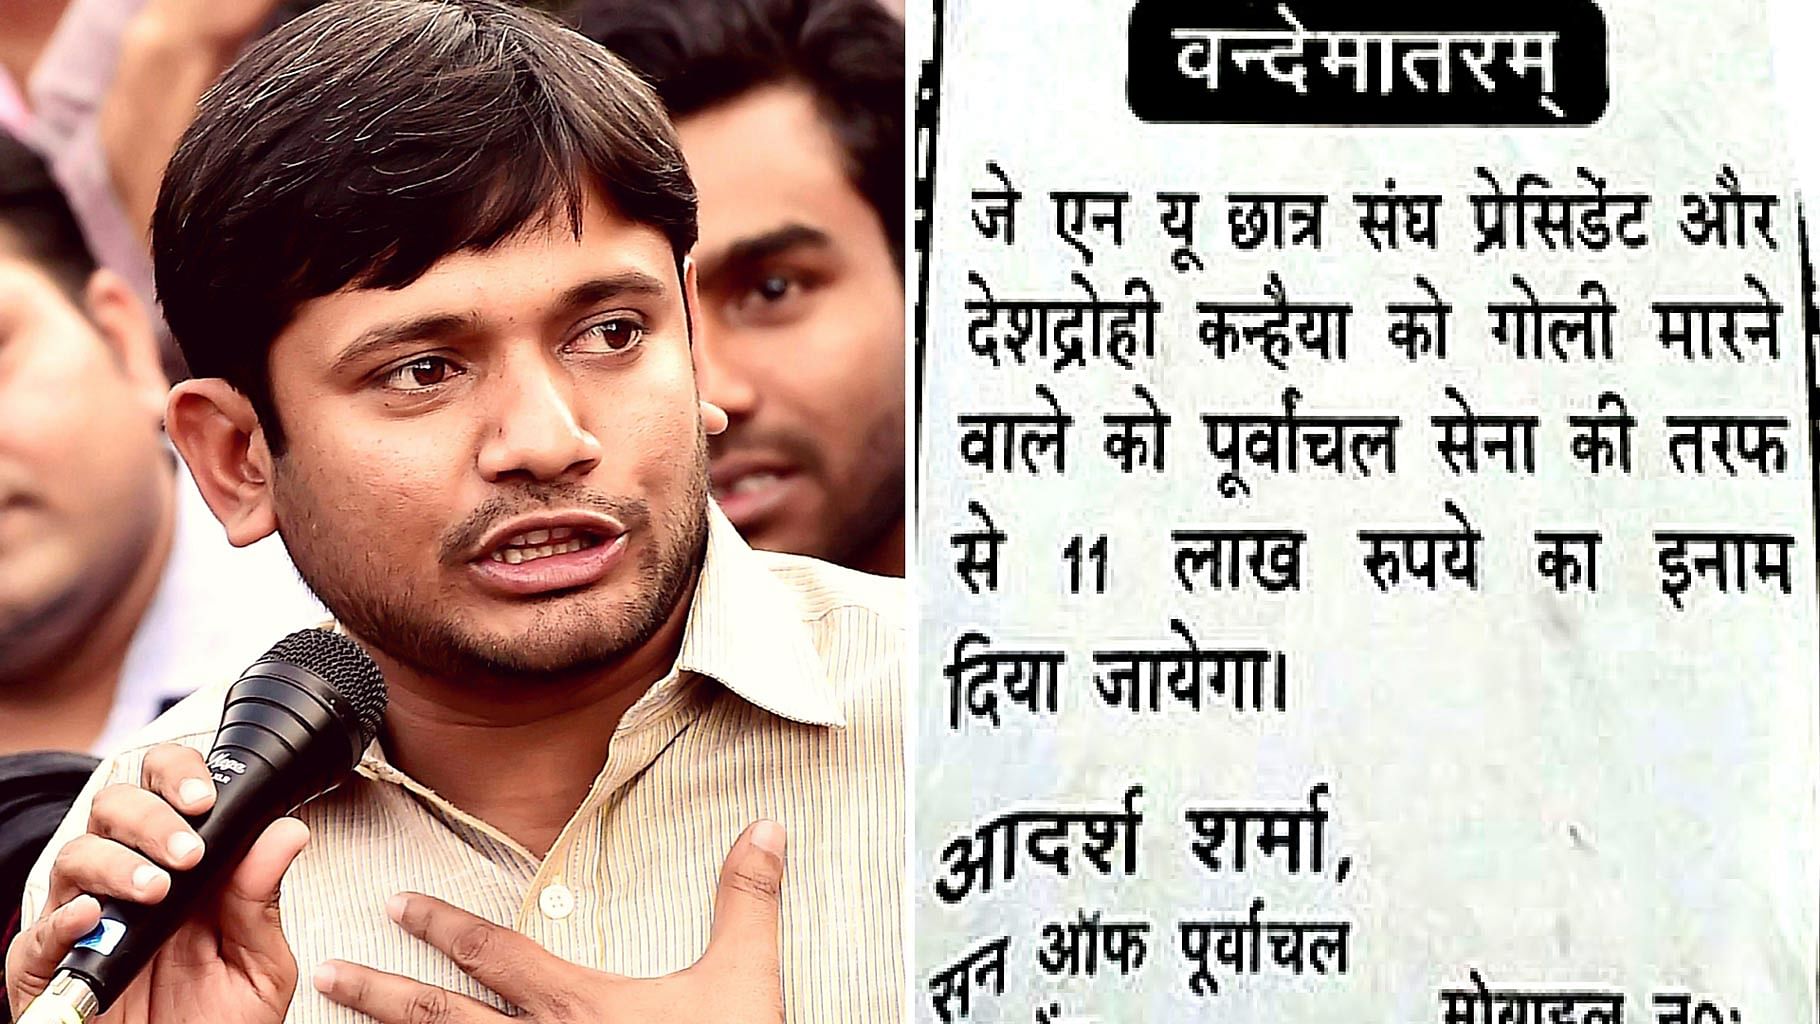 Kanhaiya Kumar, JNUSU President (left) and the poster offering a bounty on him. (Photo: PTI/Altered by <b>The Quint</b>)